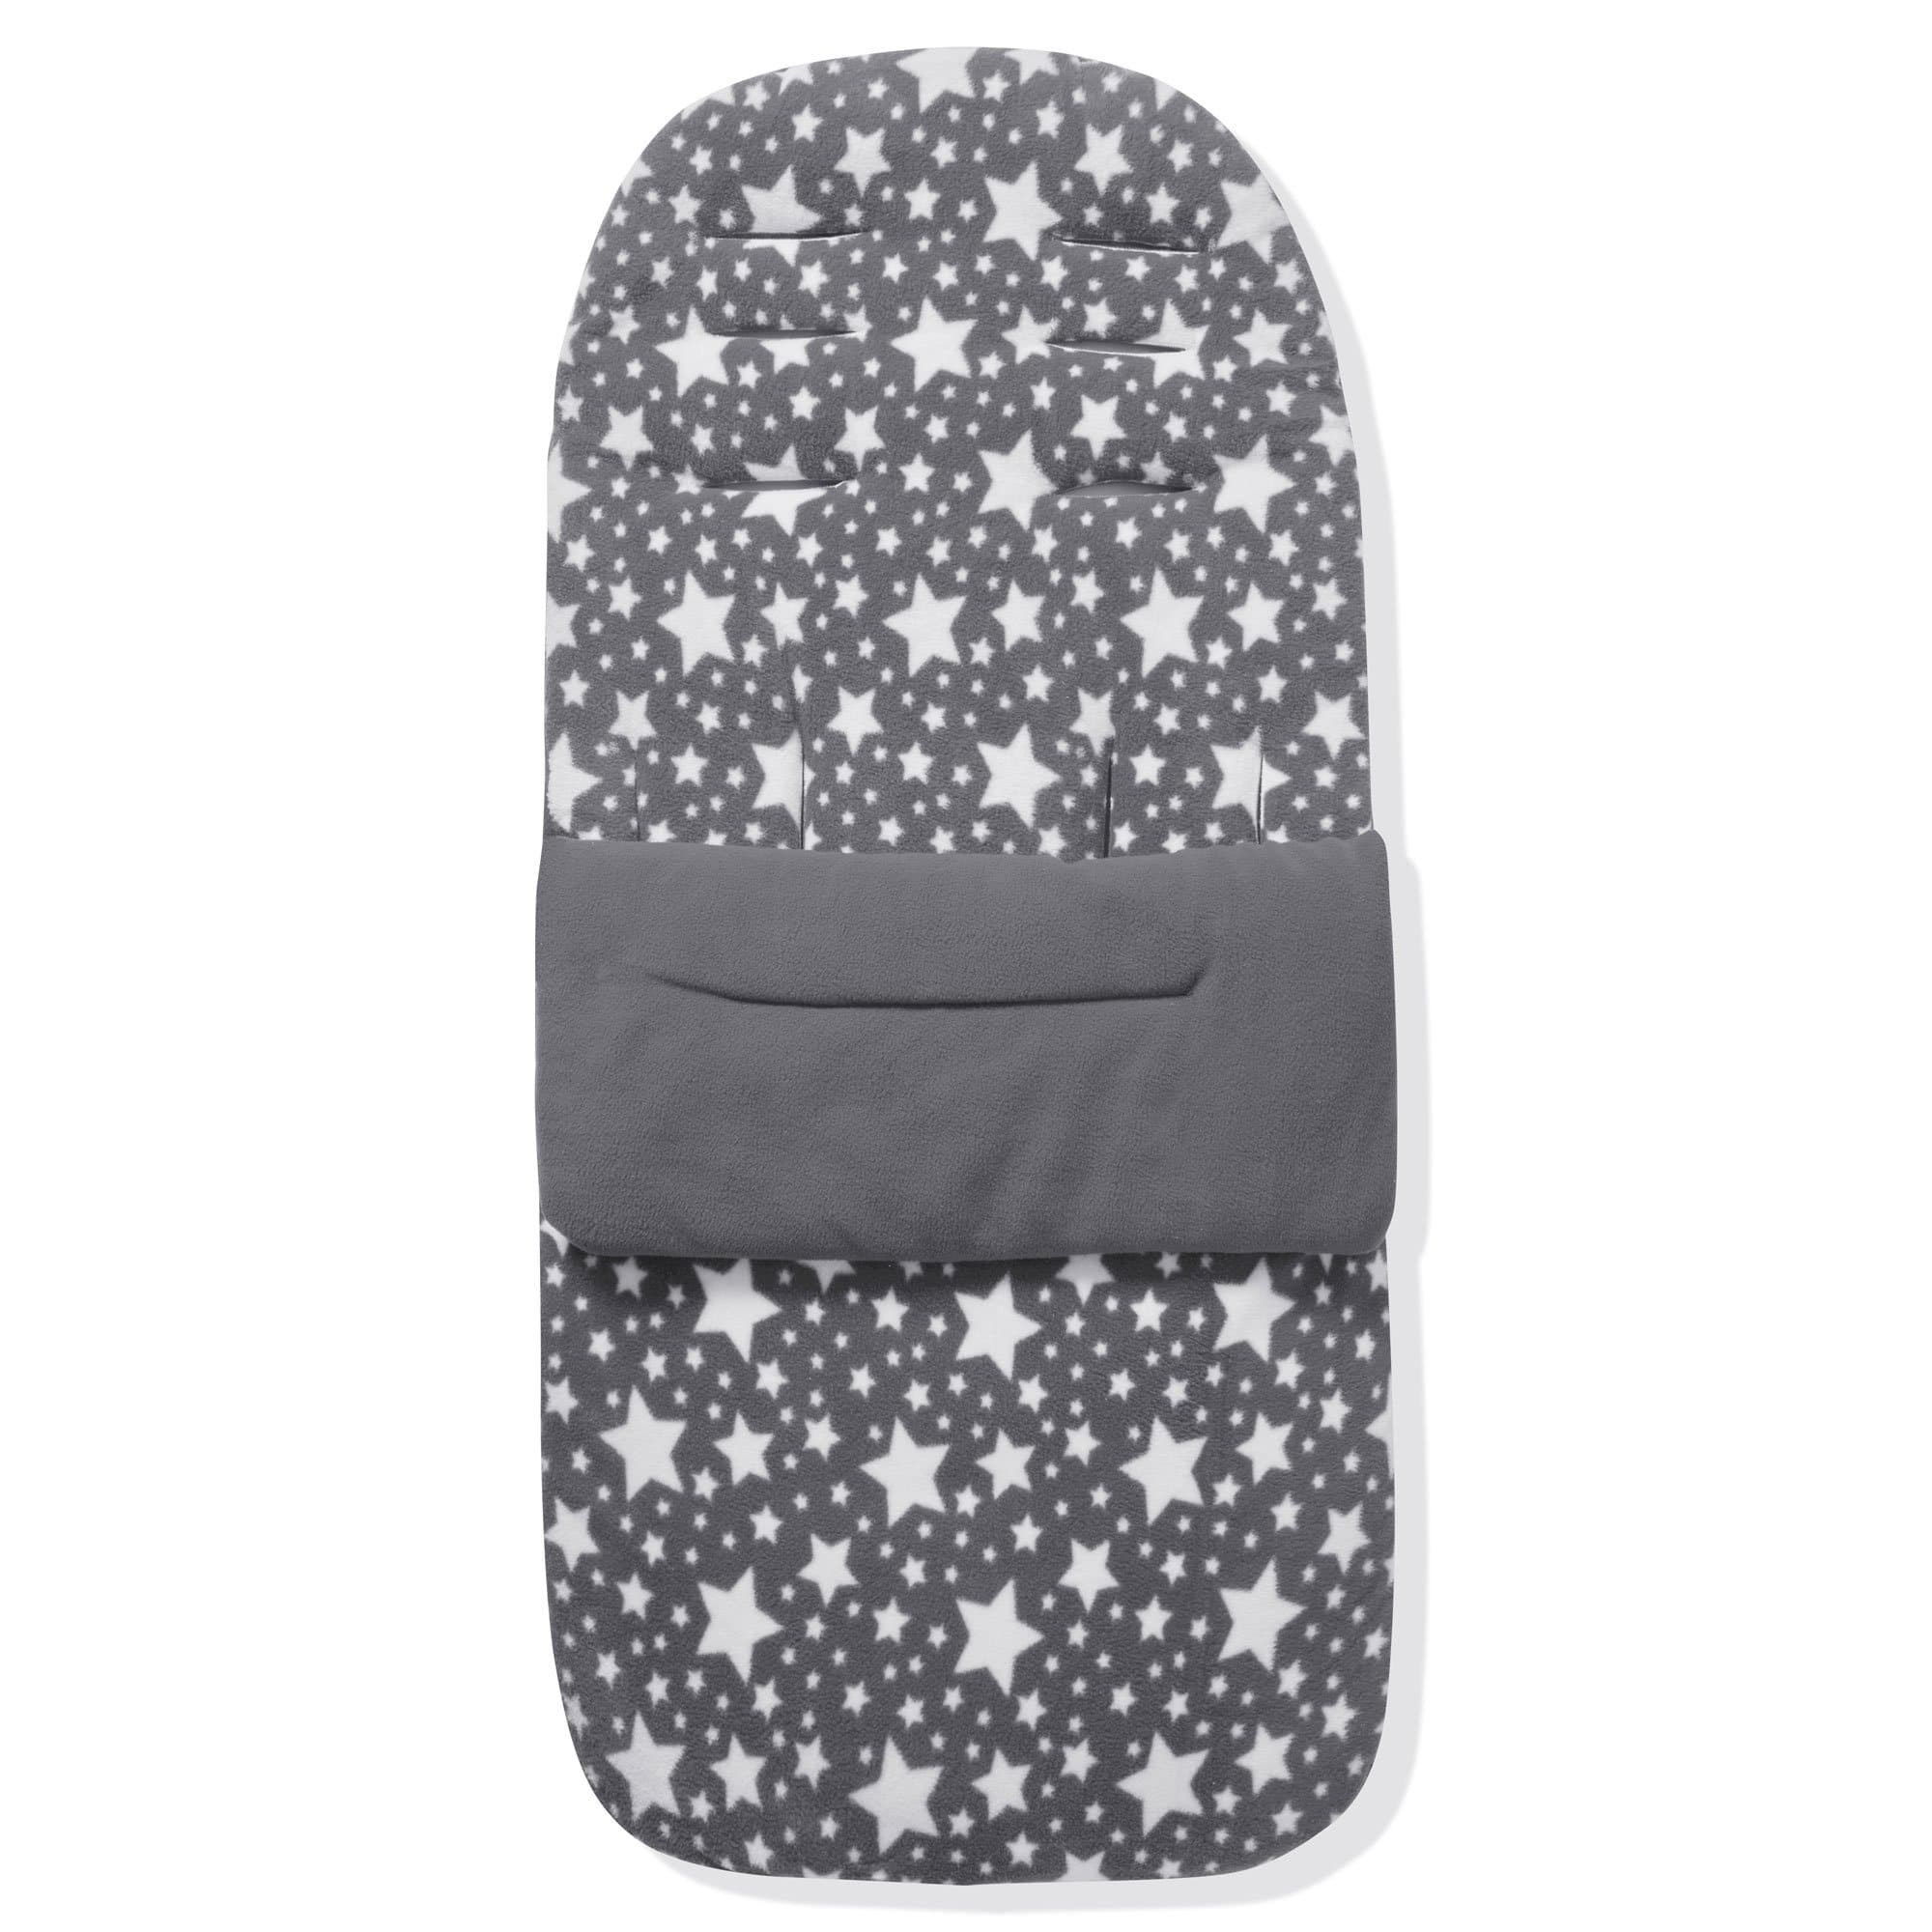 Fleece Footmuff / Cosy Toes Compatible with Nania - Grey Star / Fits All Models | For Your Little One